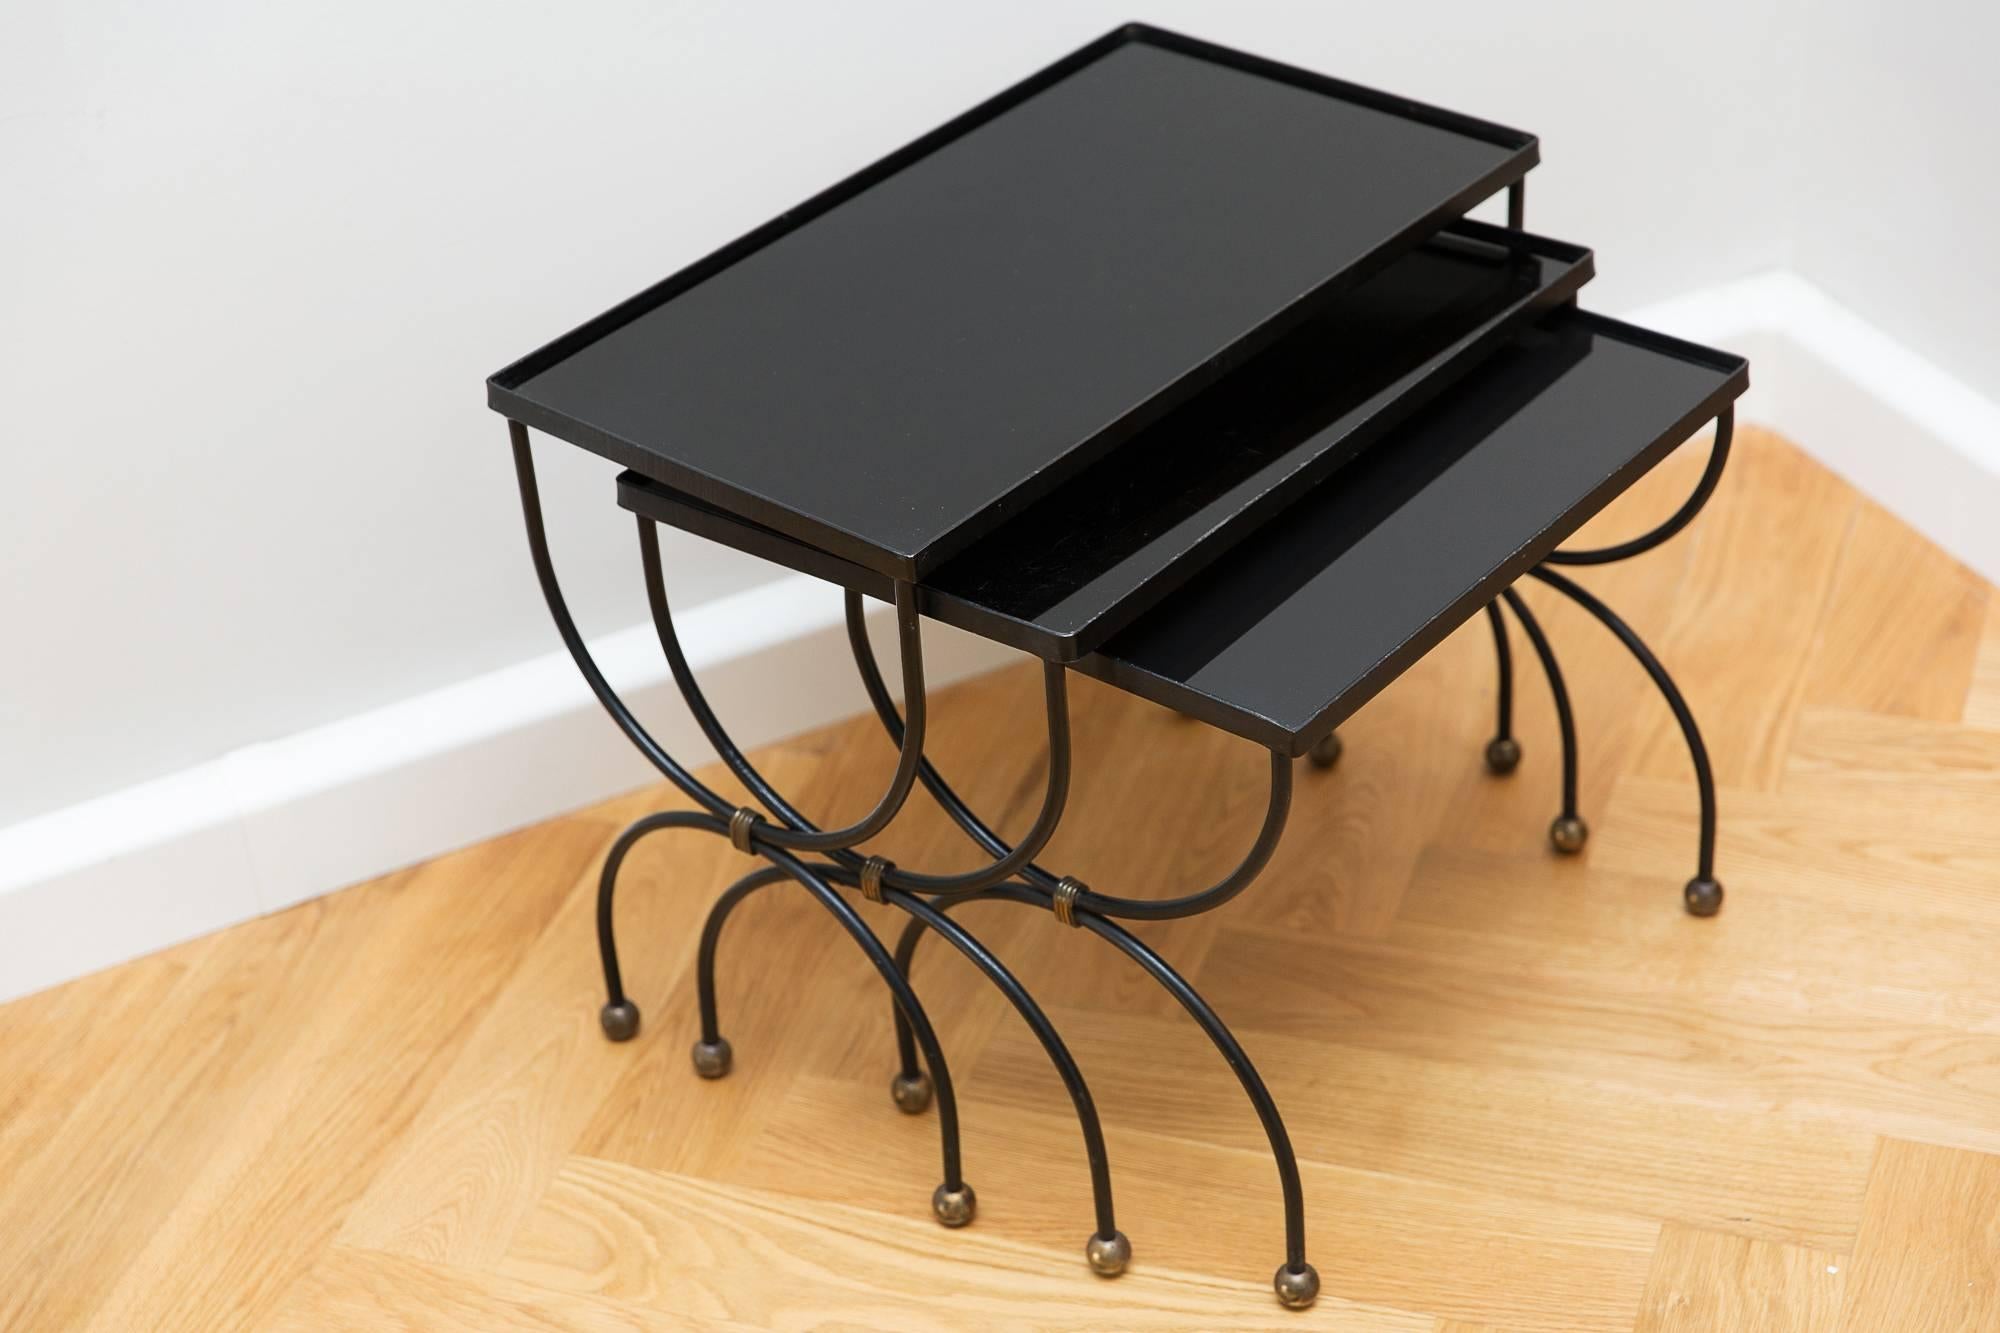 Set of three side tables, France, circa 1950, lacquered iron, brass, brass ball legs, black opaline glass tops.
Measures: Width 54 cm, 48.5 cm, 42.5 cm.
Height 44 cm, 40 cm, 38 cm.
 